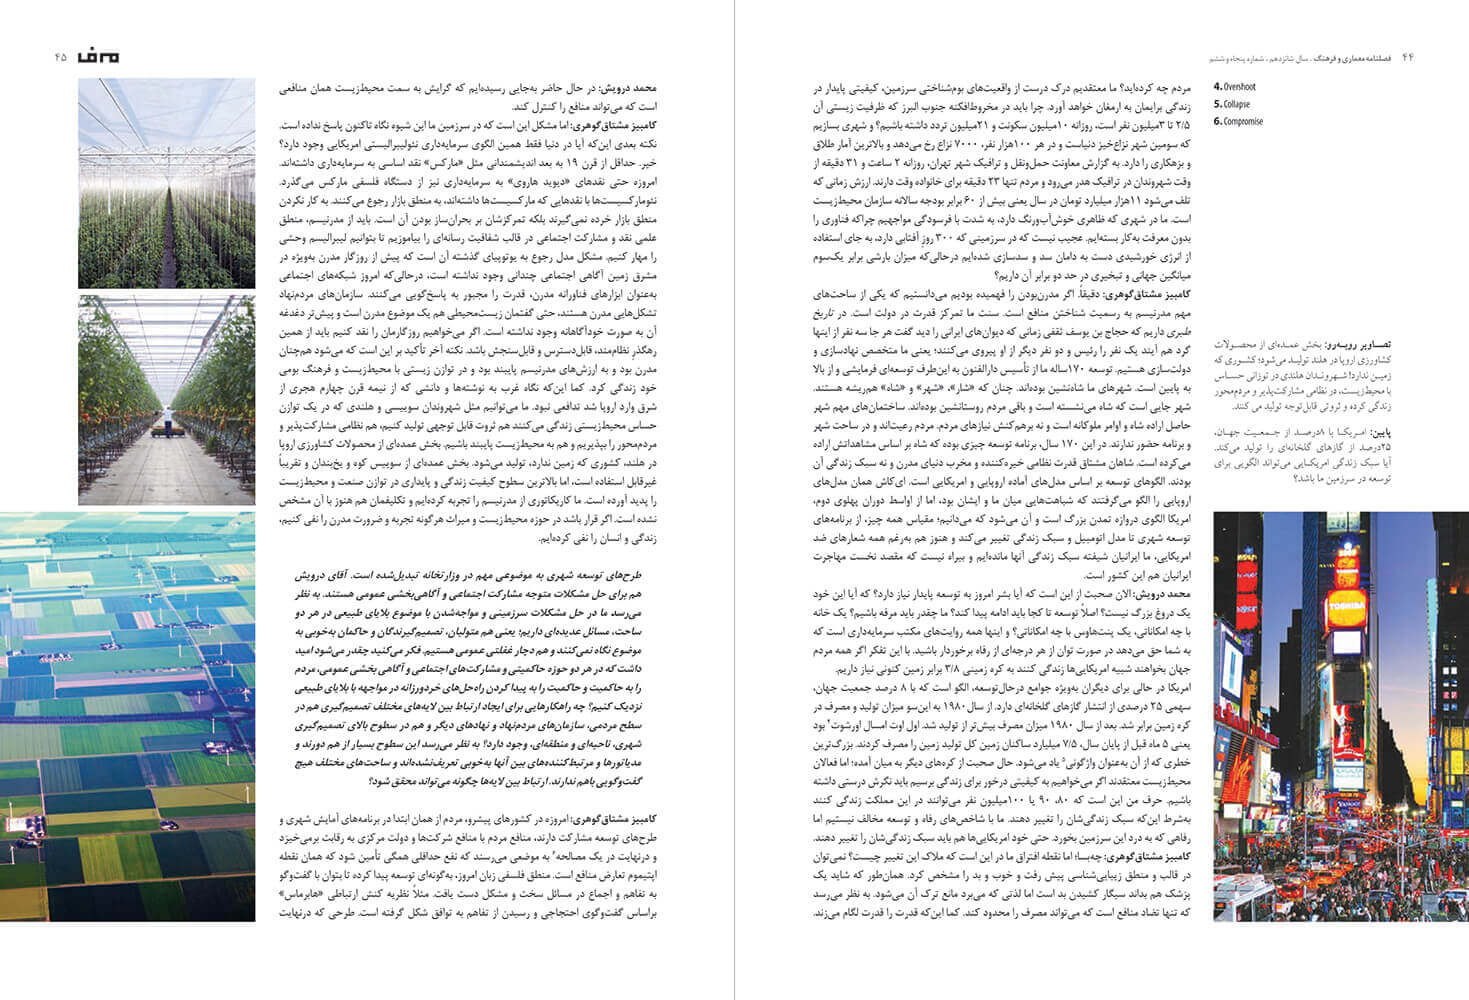 picture no. 5 of publication: Identity and Territorial challenges, author: Kambiz Moshtaq